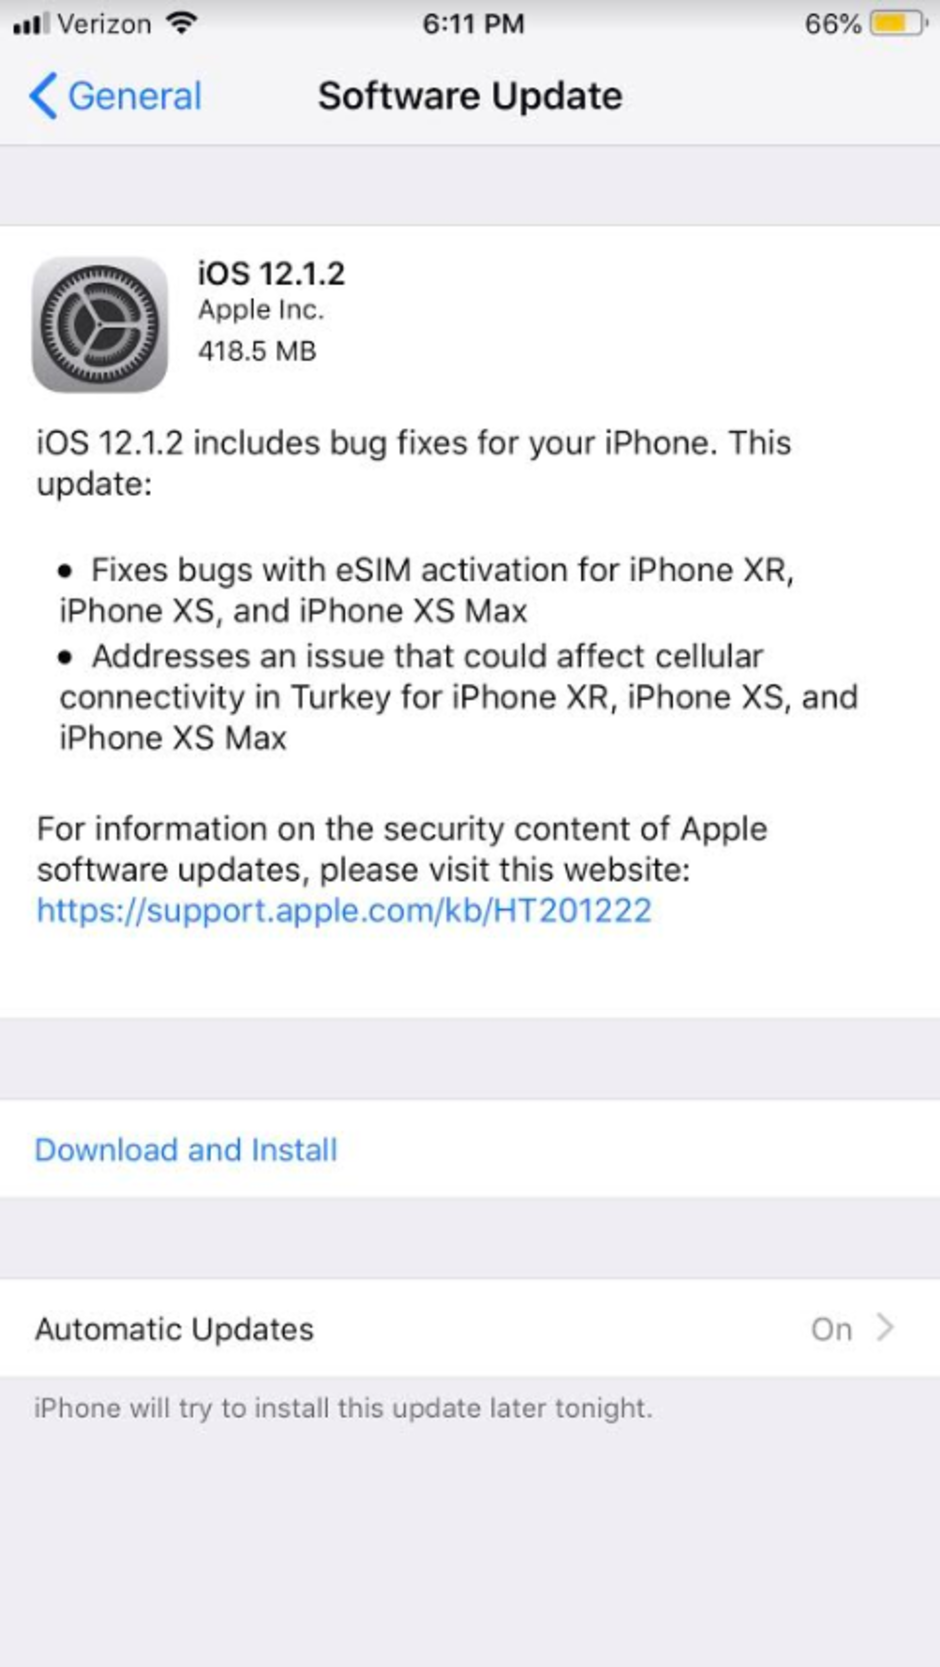 Apple pushes out iOS 12.1.2 - Apple releases iOS 12.1.2 to exterminate bugs messing with eSIM and cellular connectivity